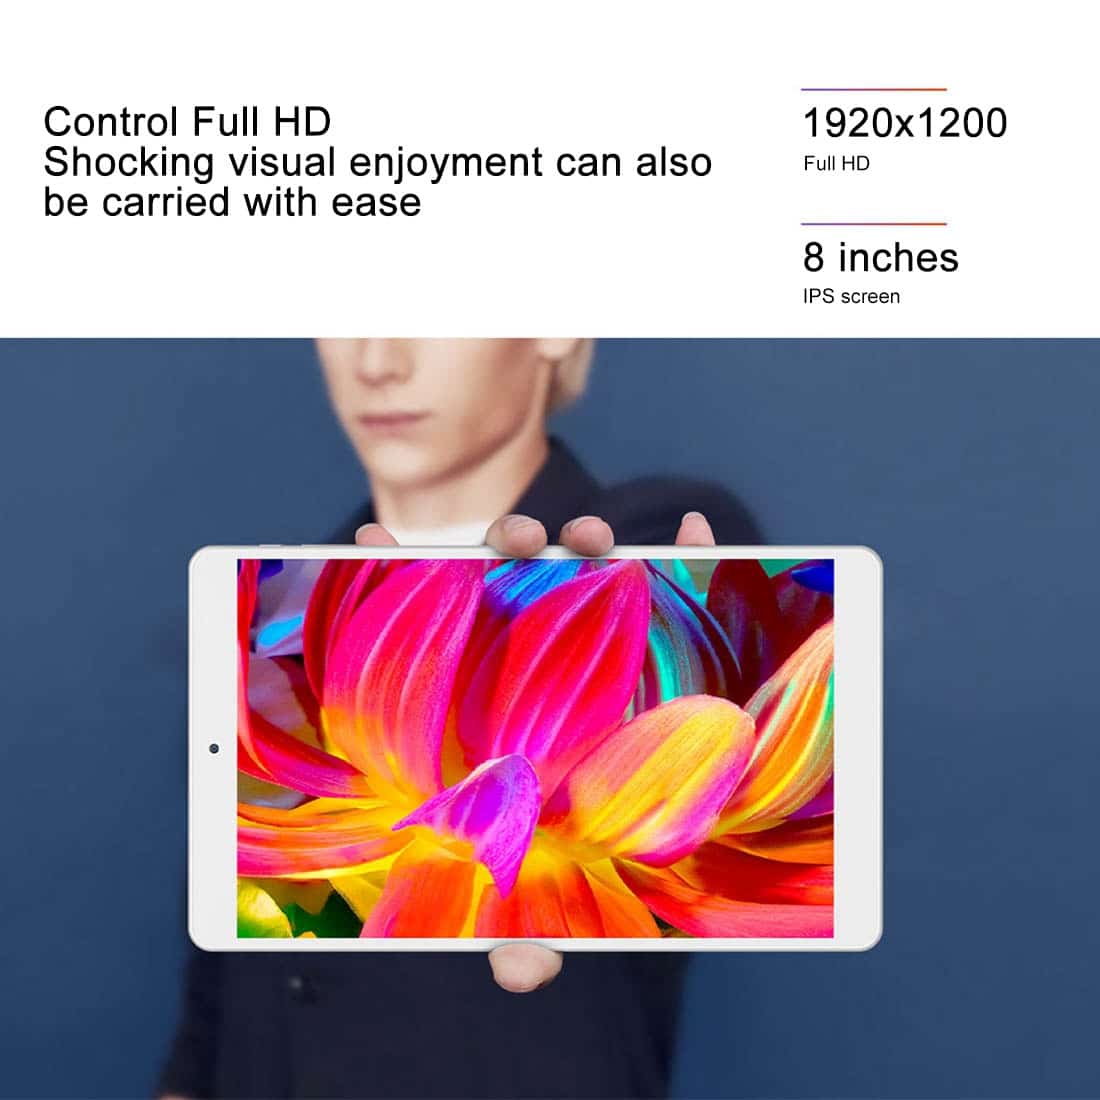 Teclast P80 Pro - 8.0 Inch Android Tablet